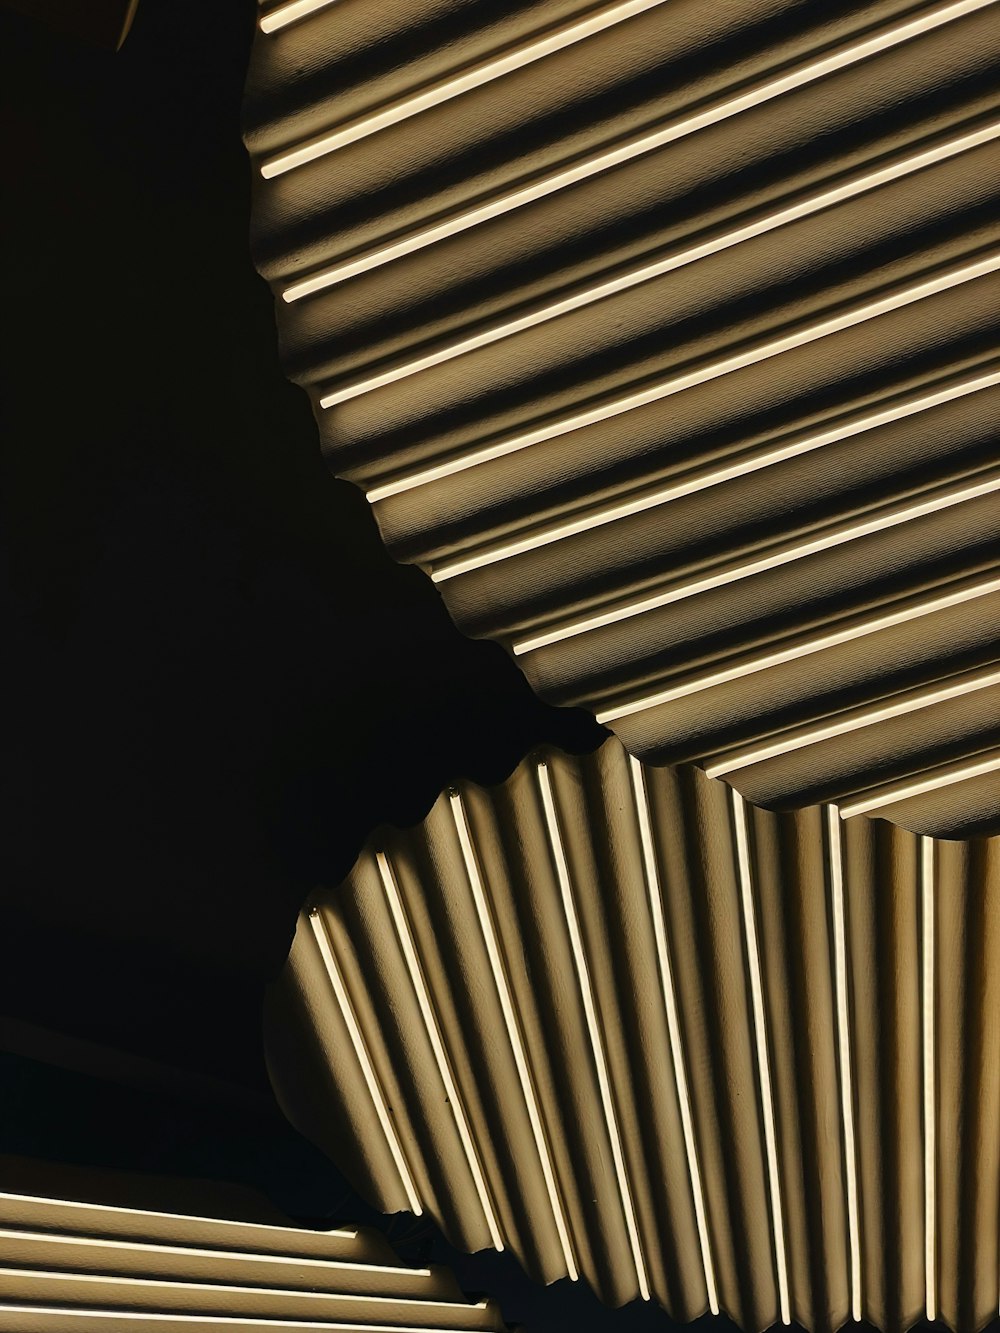 a close up of a ceiling made of metal pipes